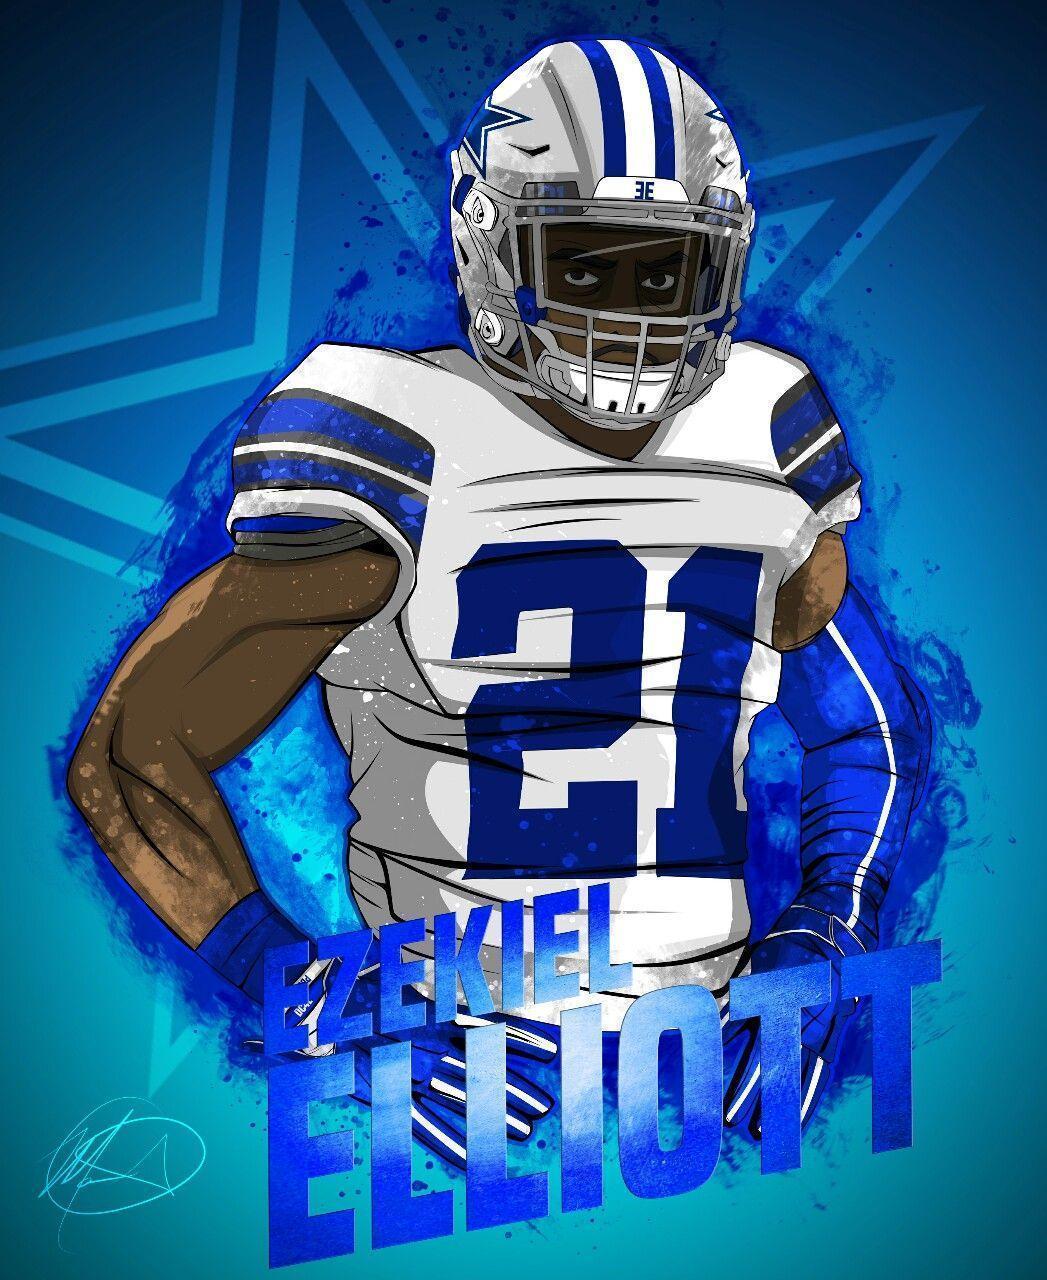 Why replace Primetime,. When you can replace Emmitt Smith